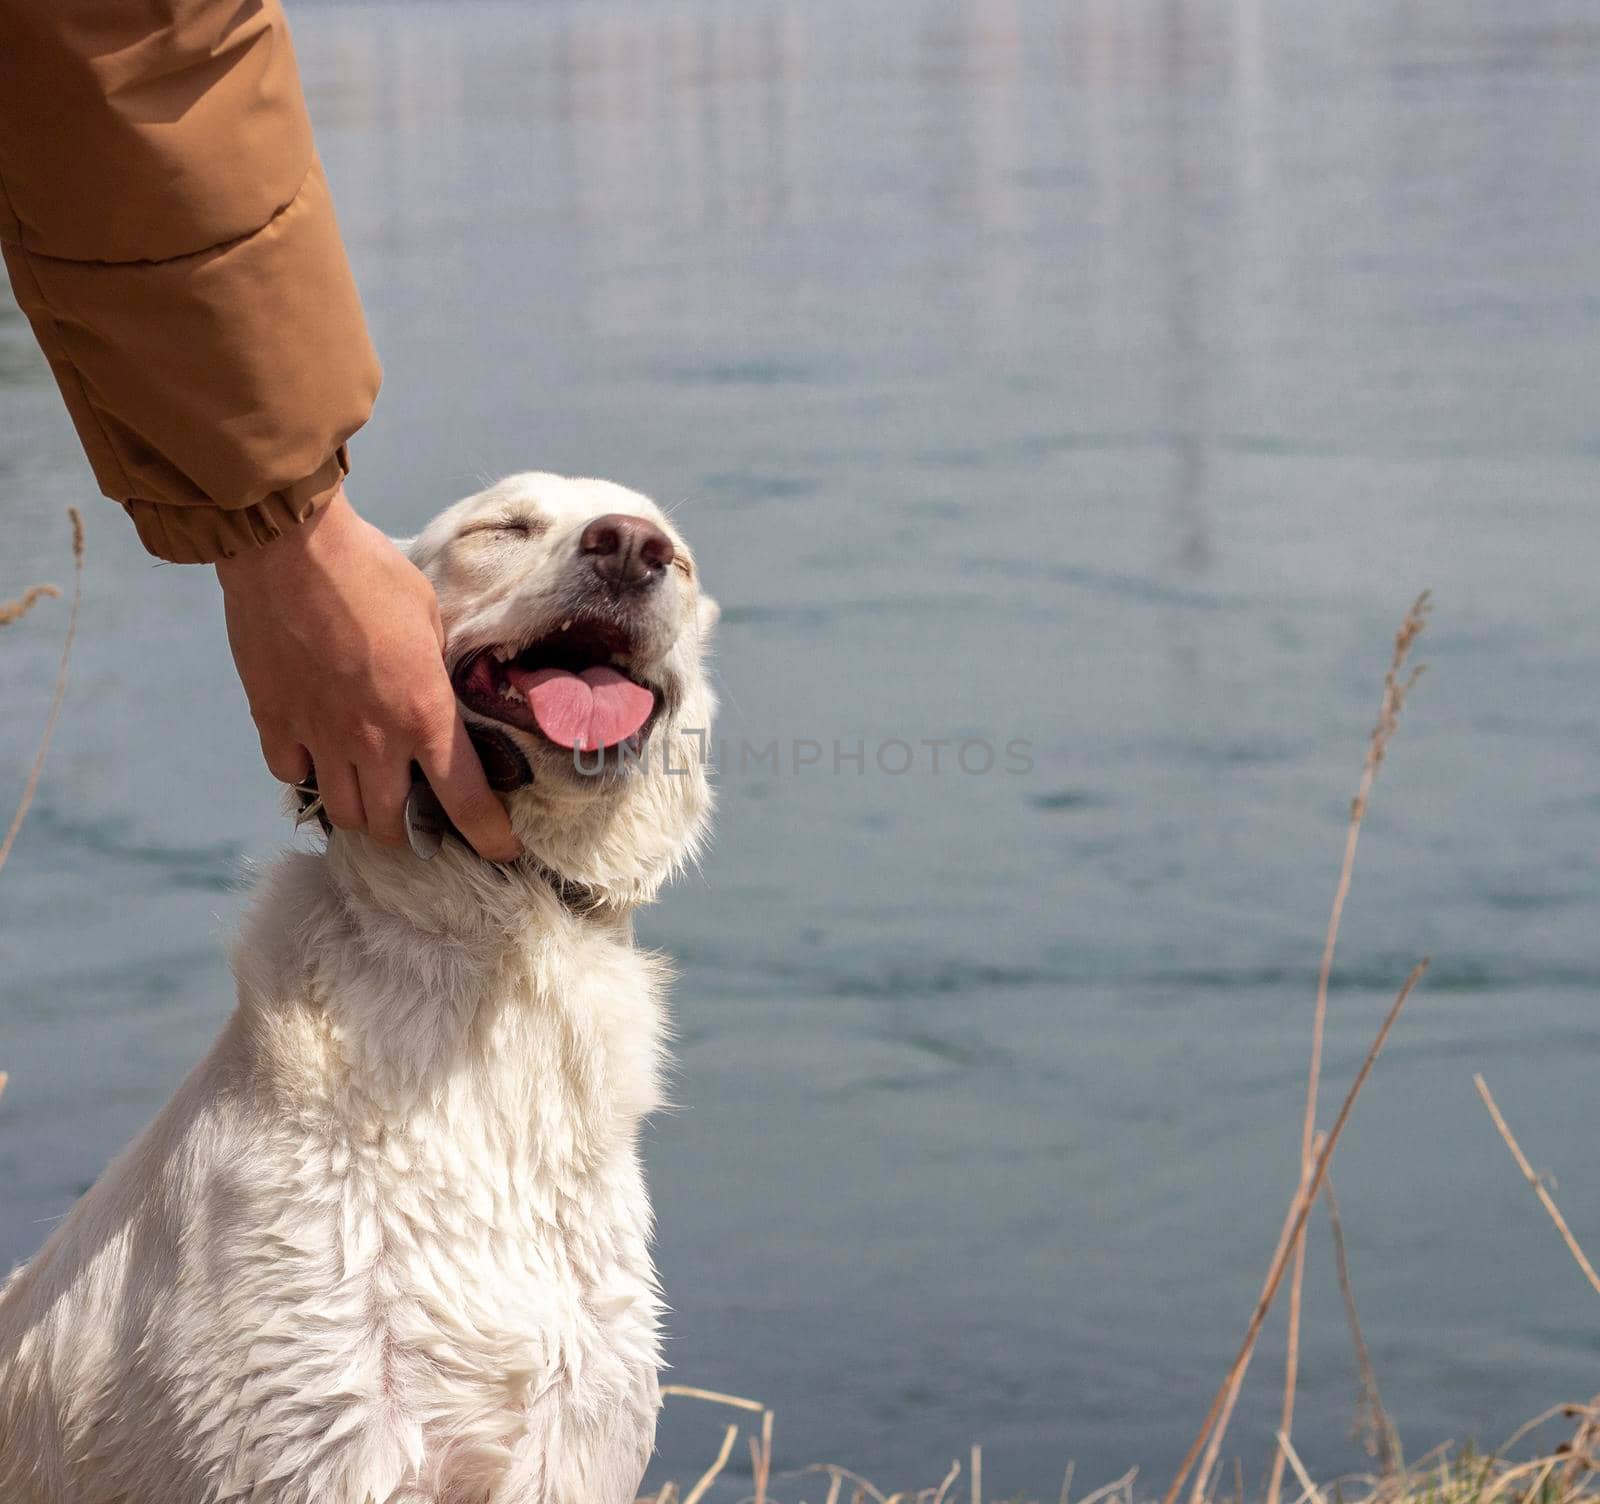 A man's hand is stroking a dog. Love for pets and friendship concept. Close up dog portrait.